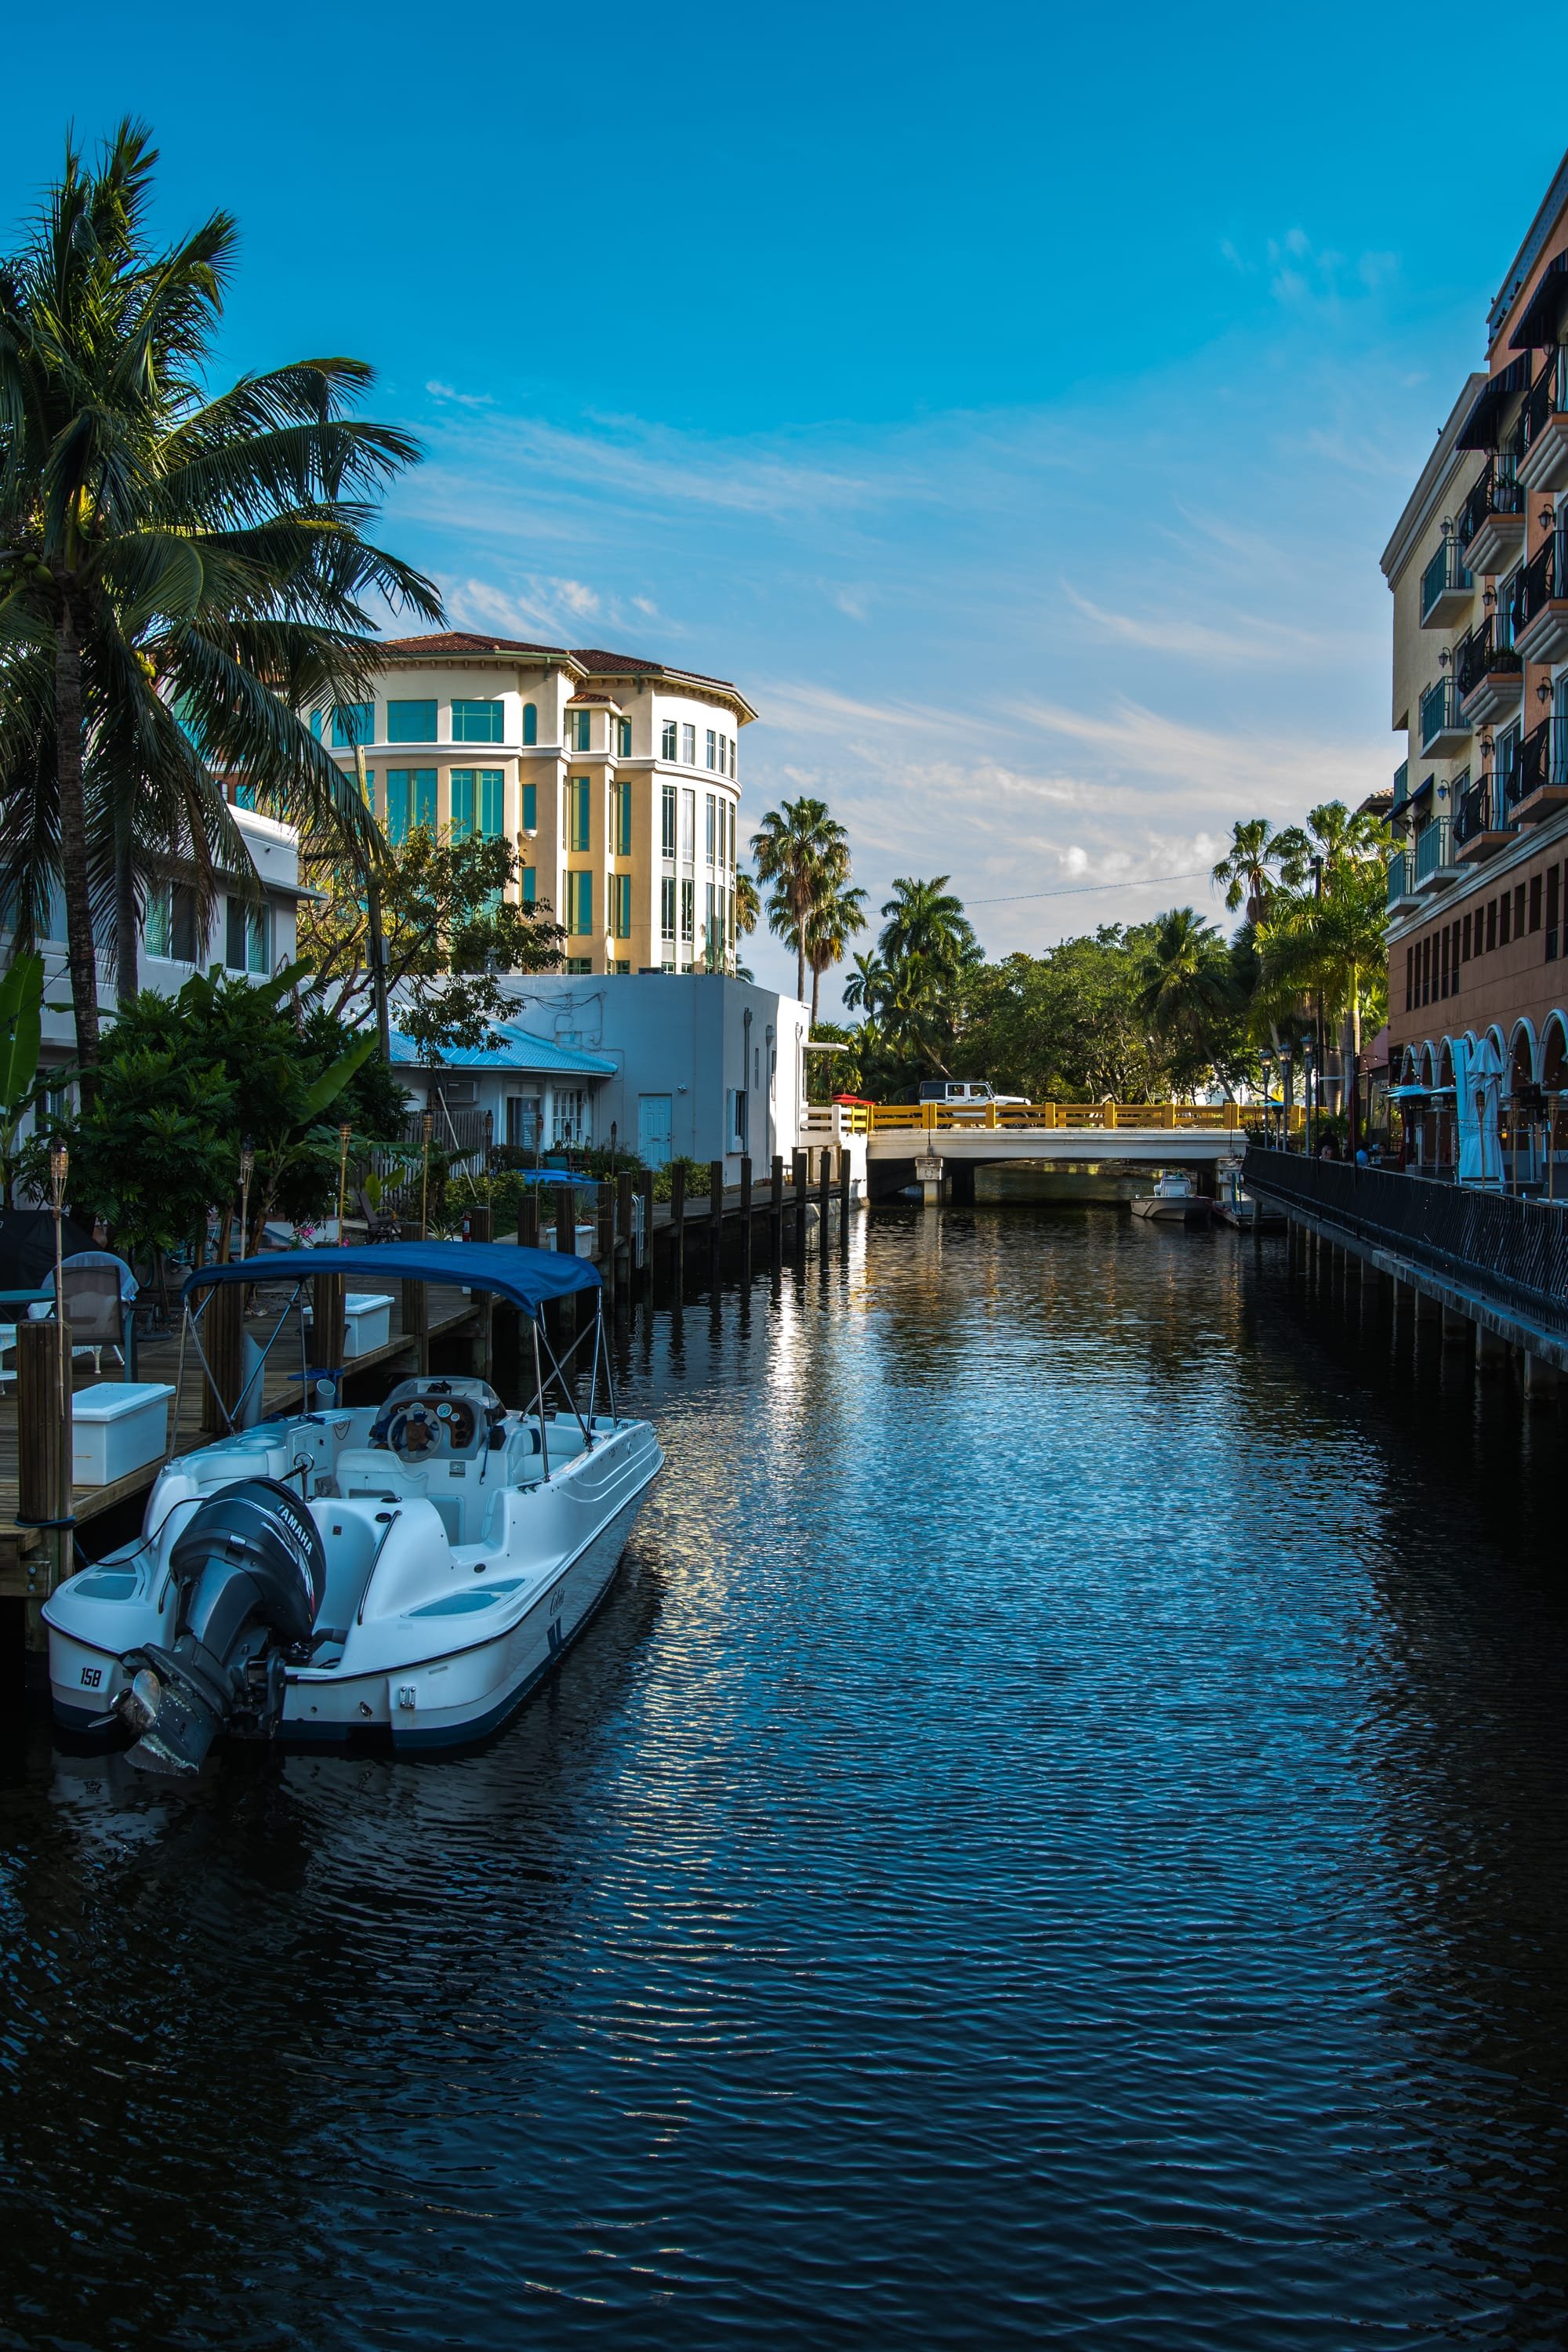 THE CANALS IN FORT LAUDERDALE